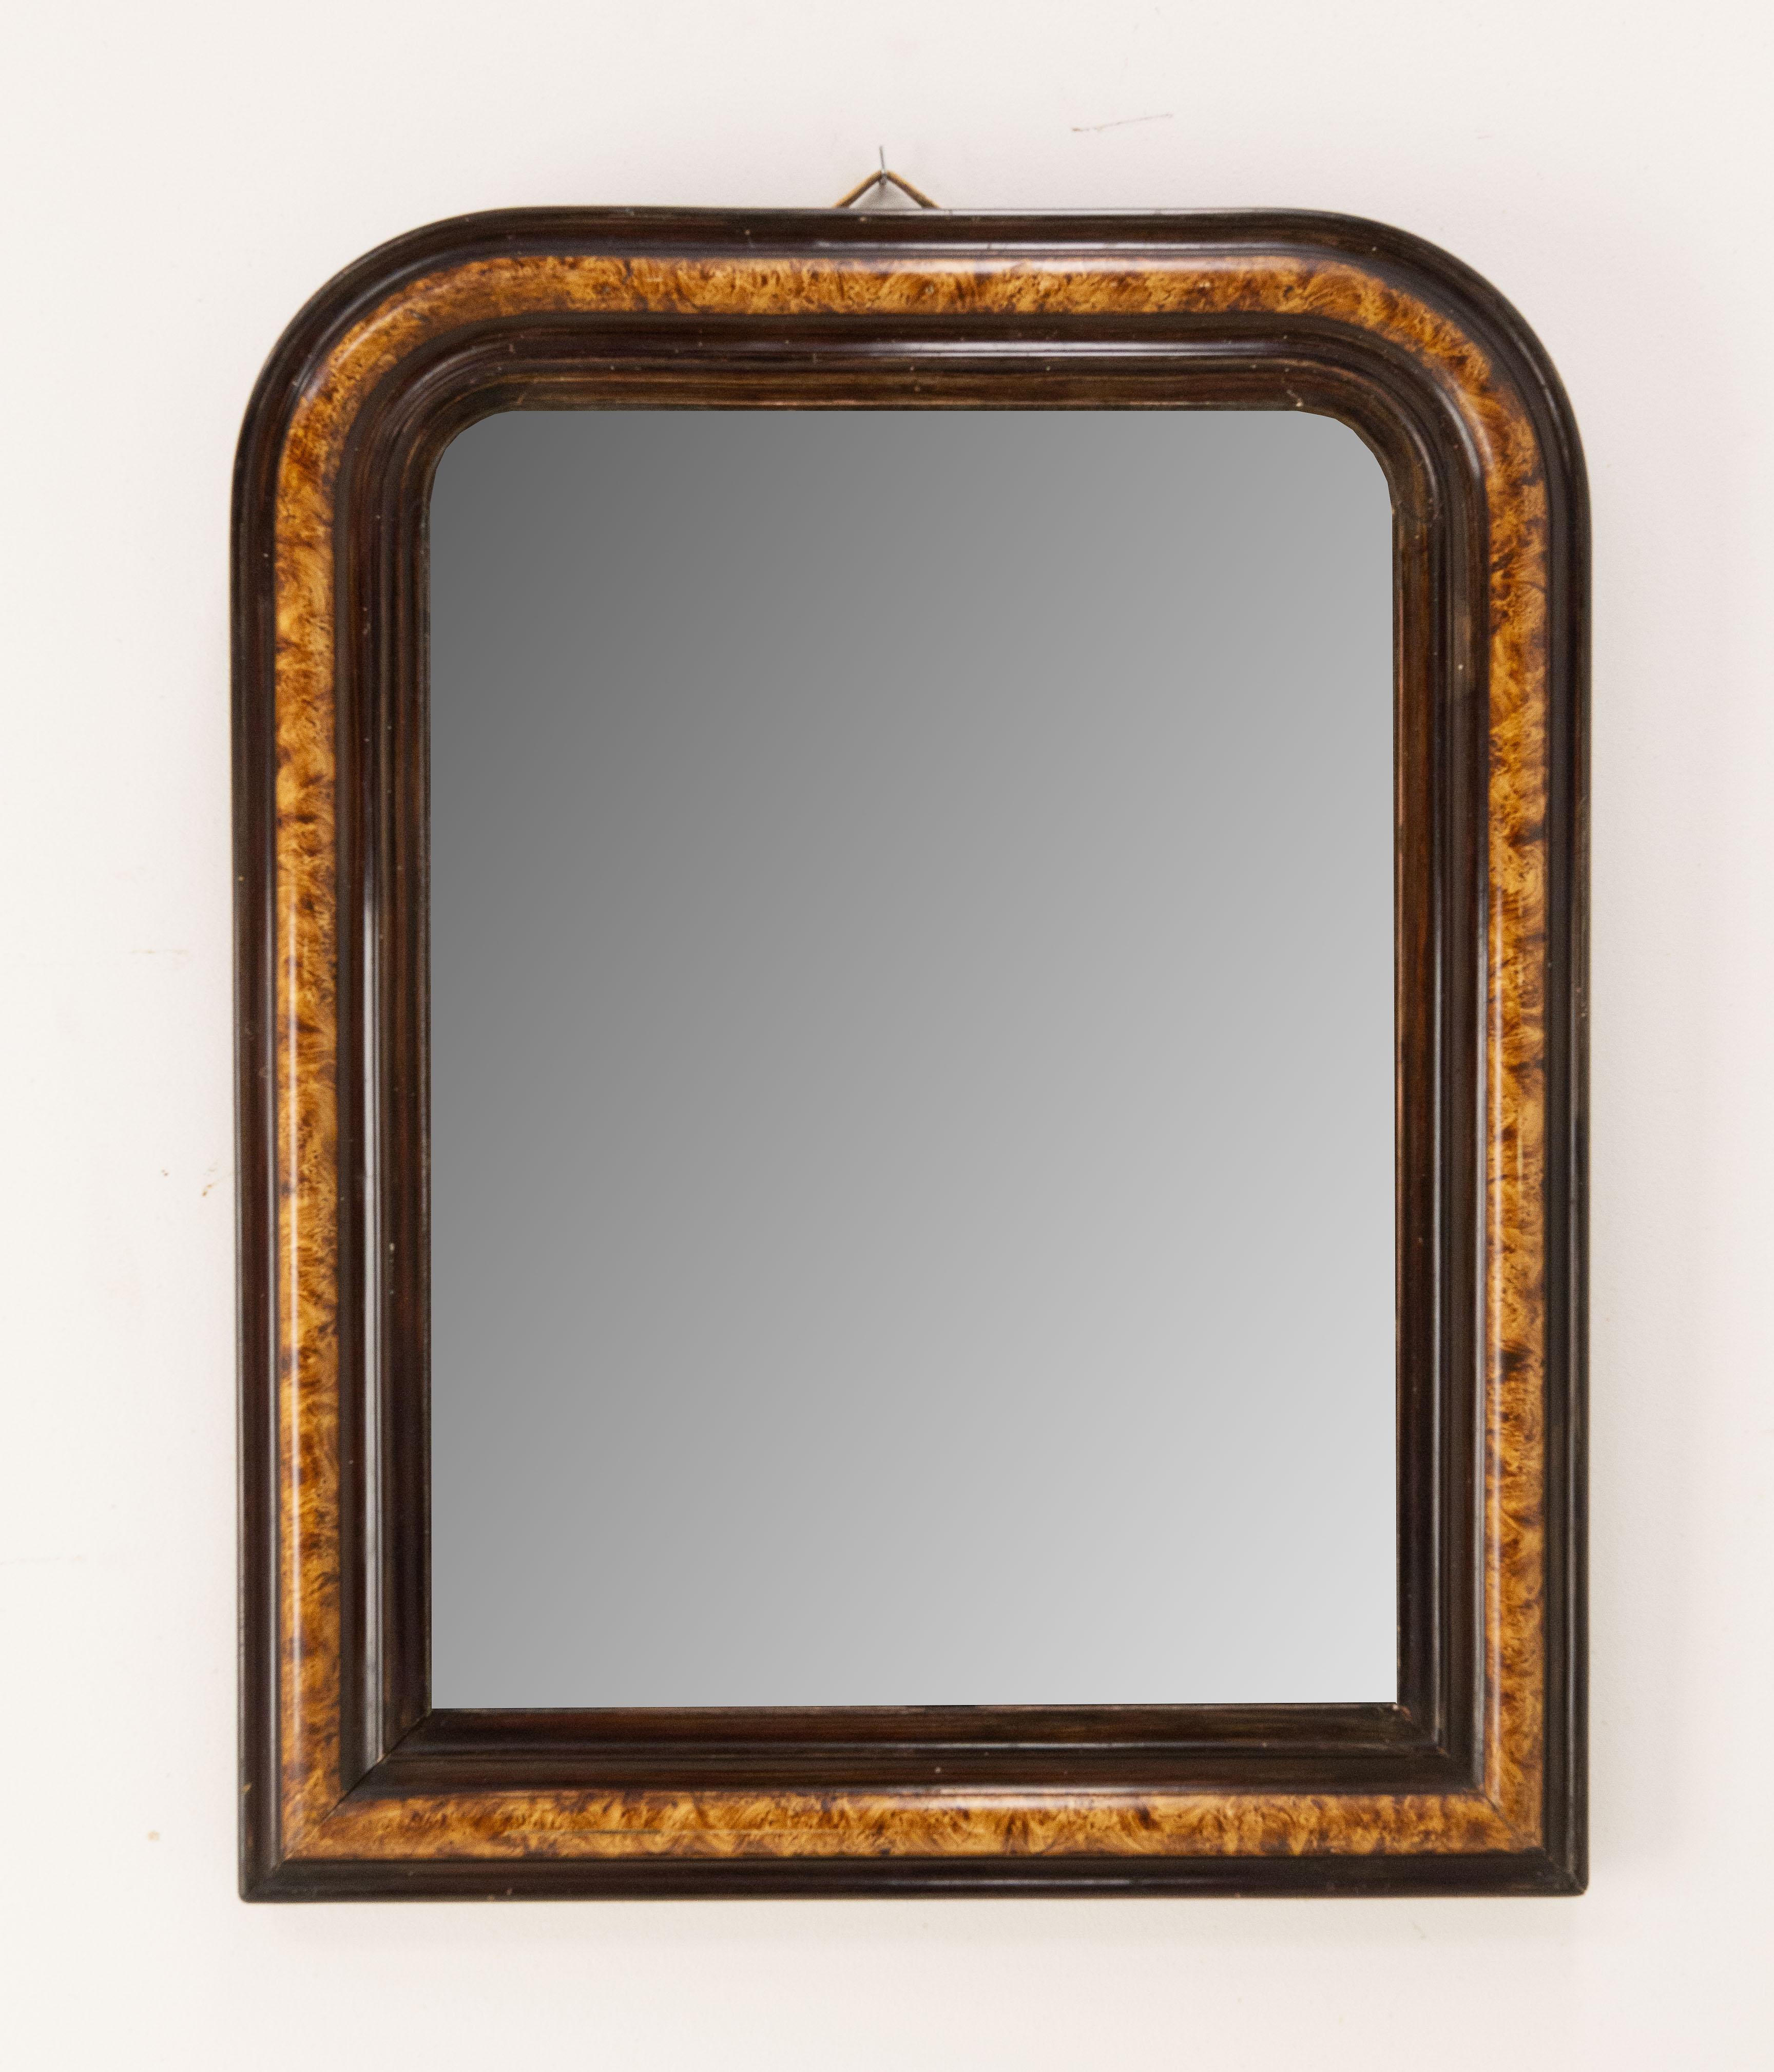 Napoléon III Stucco mirror,
Ebony imitation and burl.
The mirror has been changed.
Good antique condition.

Shipping:
L 48,5 P 4 H 60.5 9,5 KG.